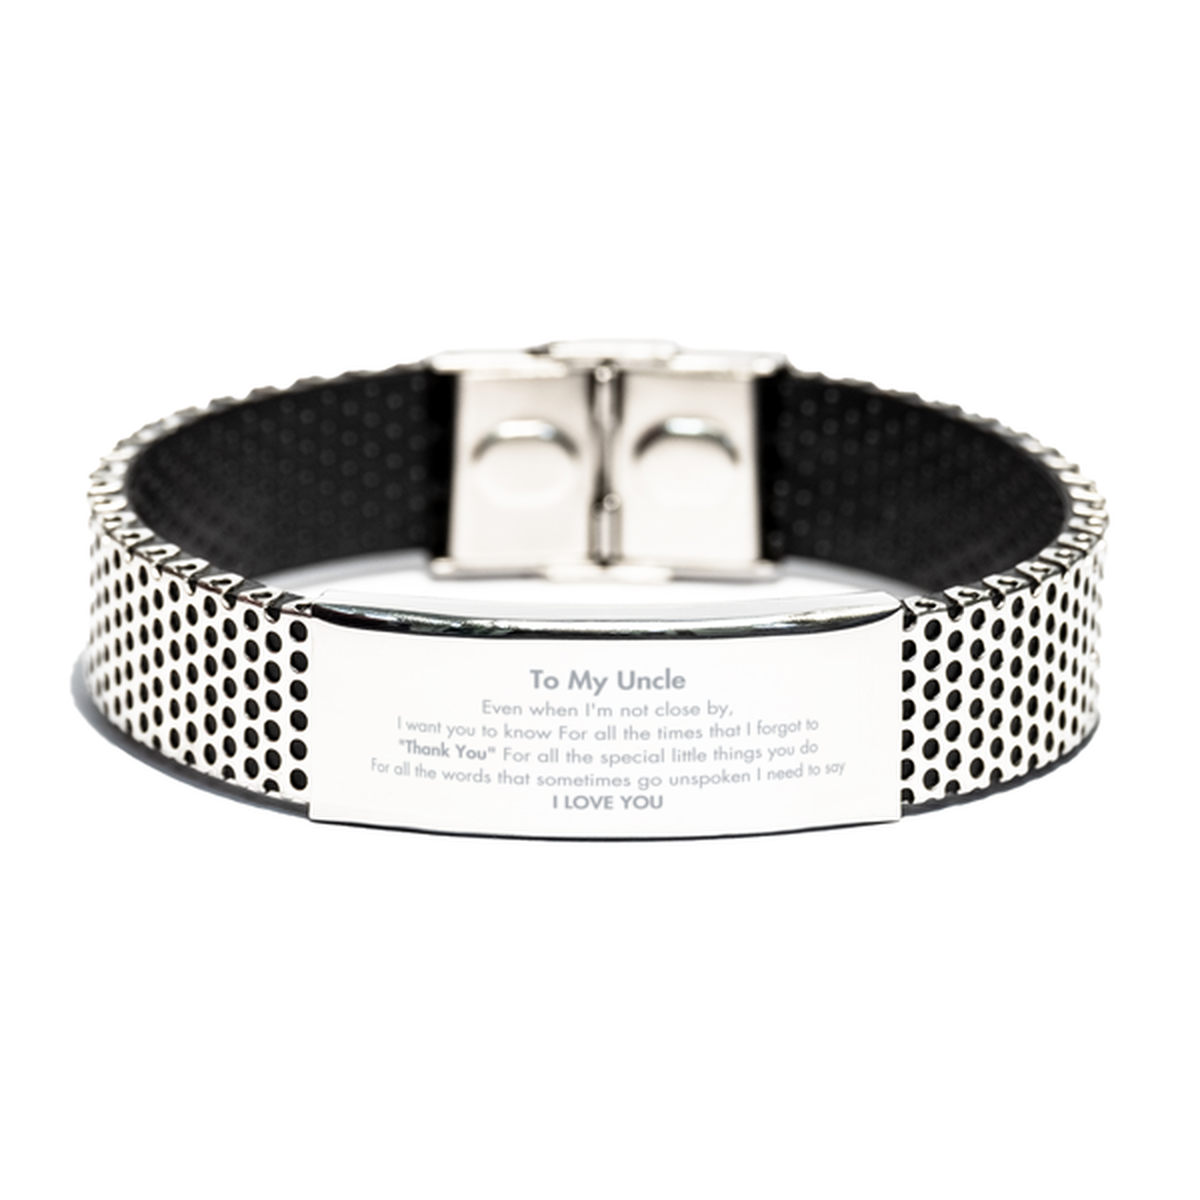 Thank You Gifts for Uncle, Keepsake Stainless Steel Bracelet Gifts for Uncle Birthday Mother's day Father's Day Uncle For all the words That sometimes go unspoken I need to say I LOVE YOU